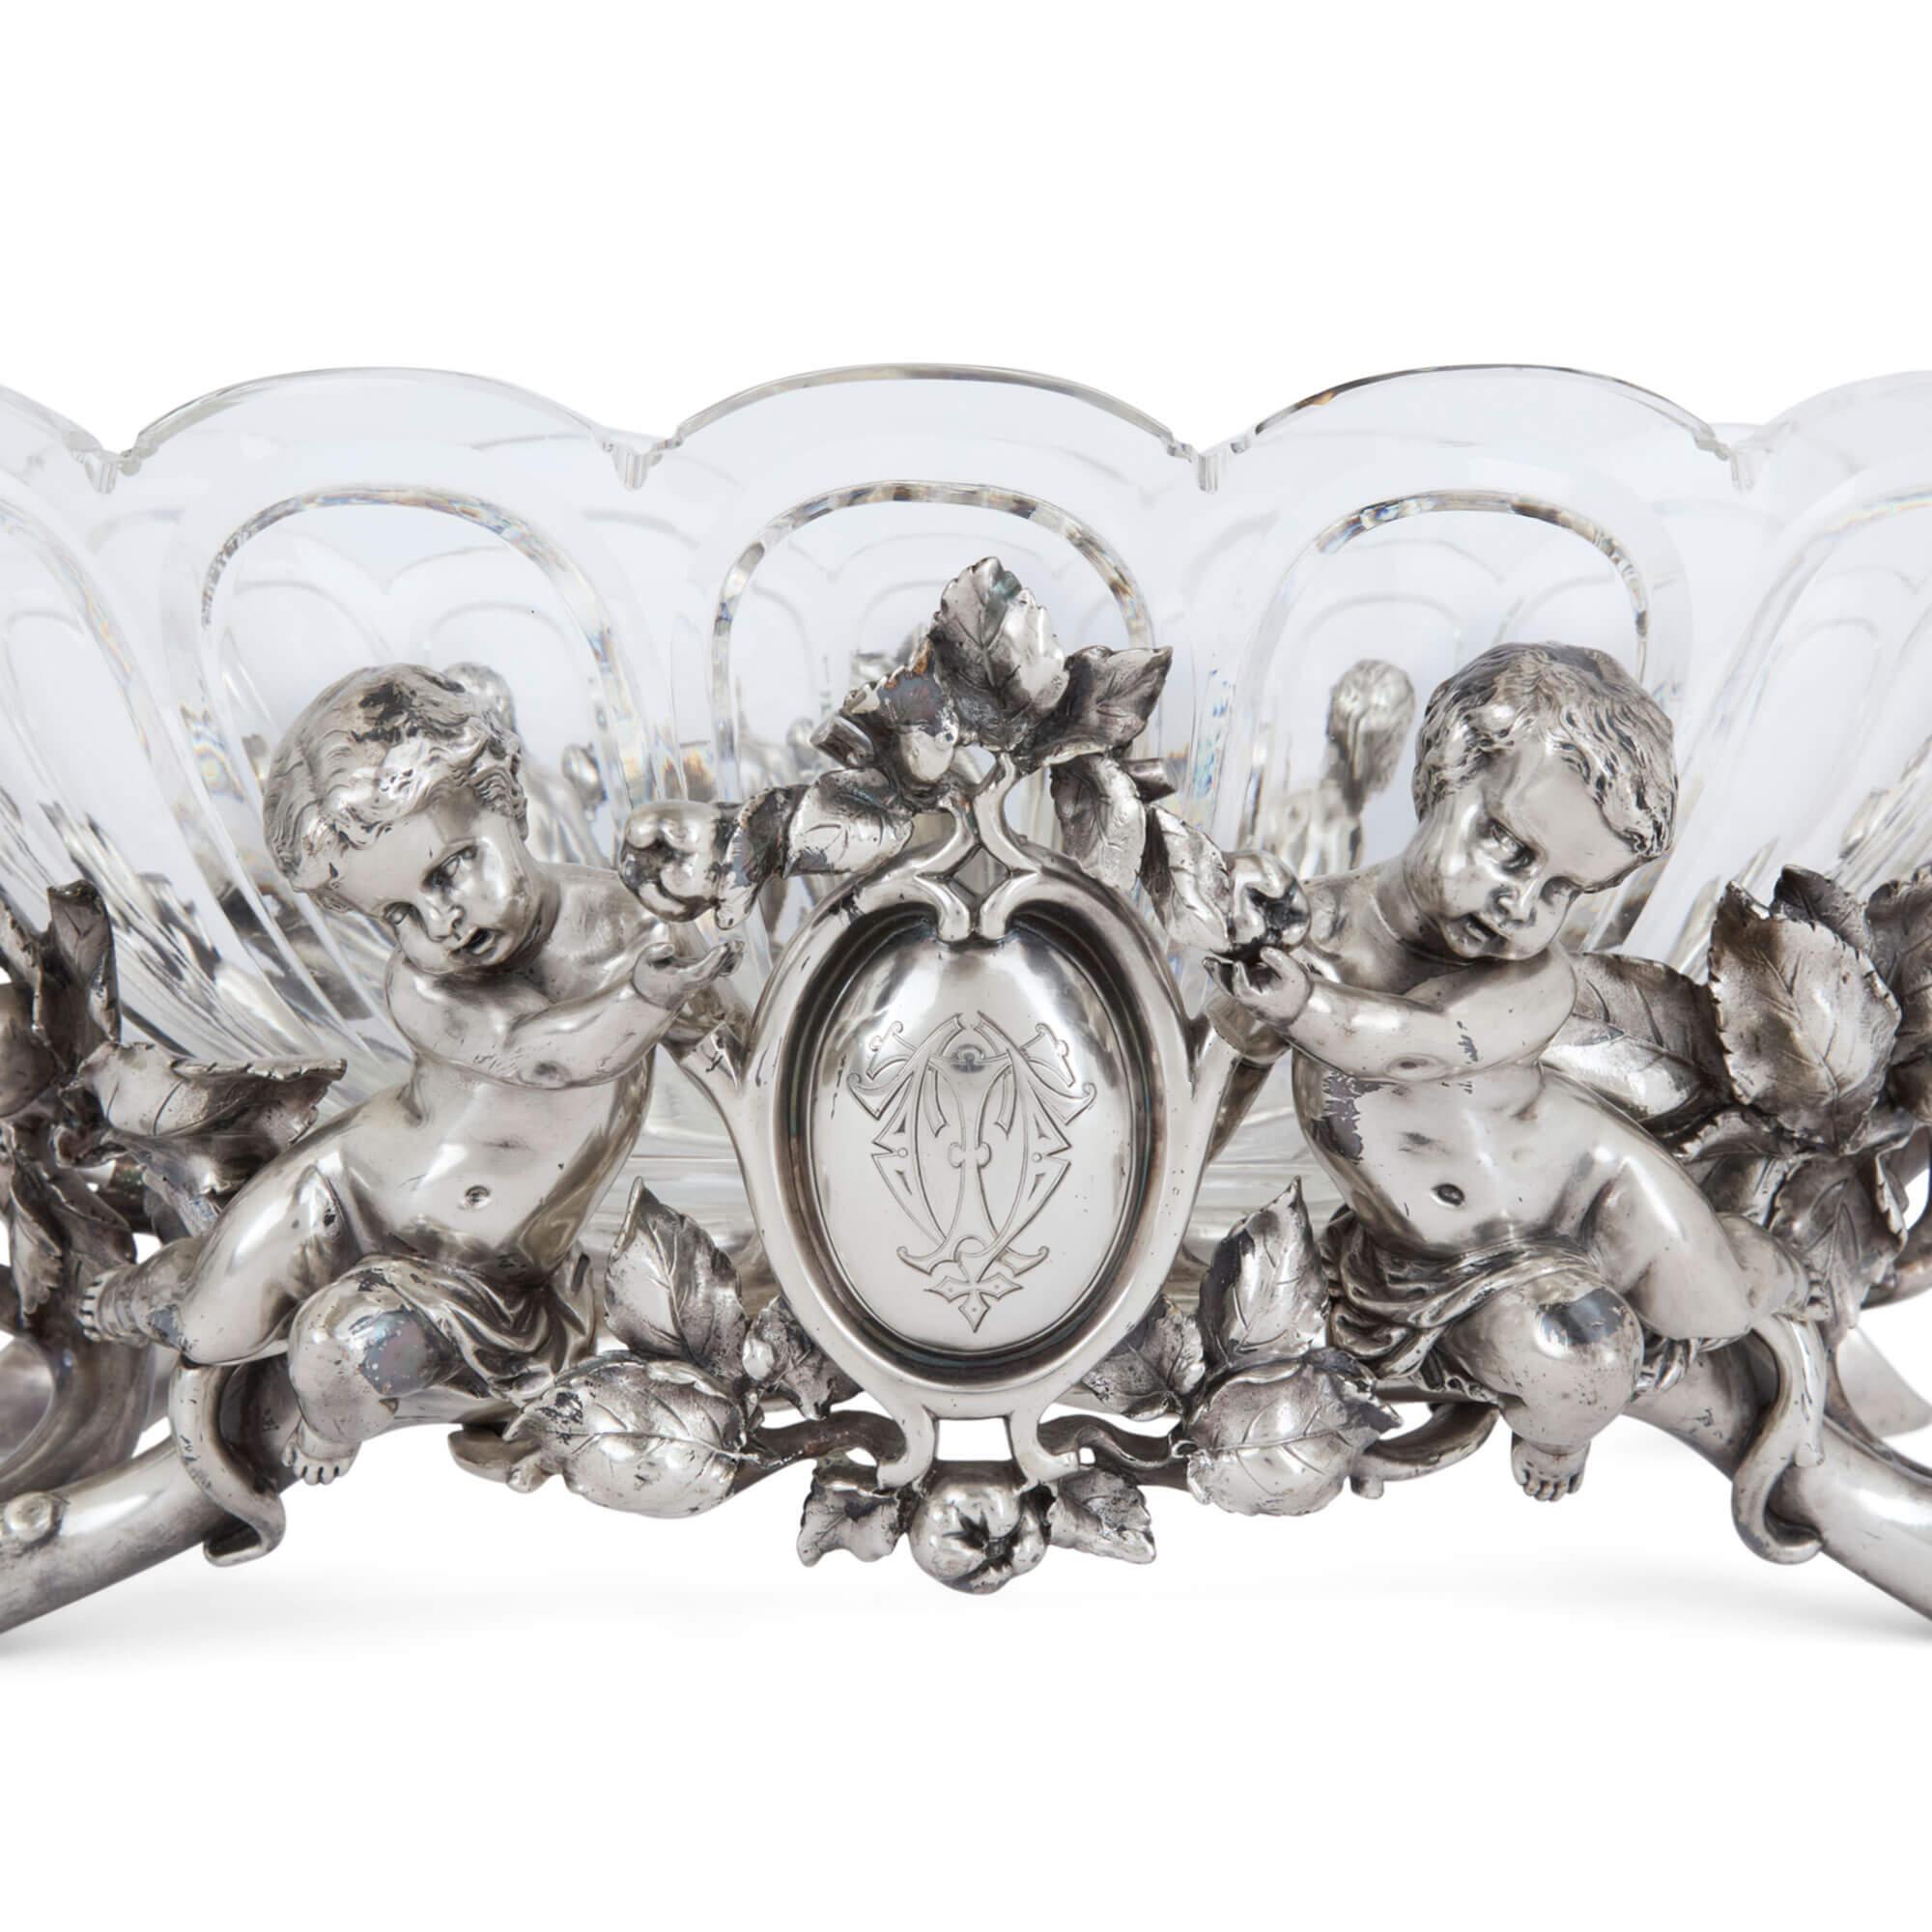 Pair of Christofle cut-glass and silvered bronze centrepieces
French, 19th Century
Height 24cm, width 63cm, depth 35cm

This exquisite pair were made by the French manufactory Christofle. Founded in 1830 by Charles Christofle, the firm was the first